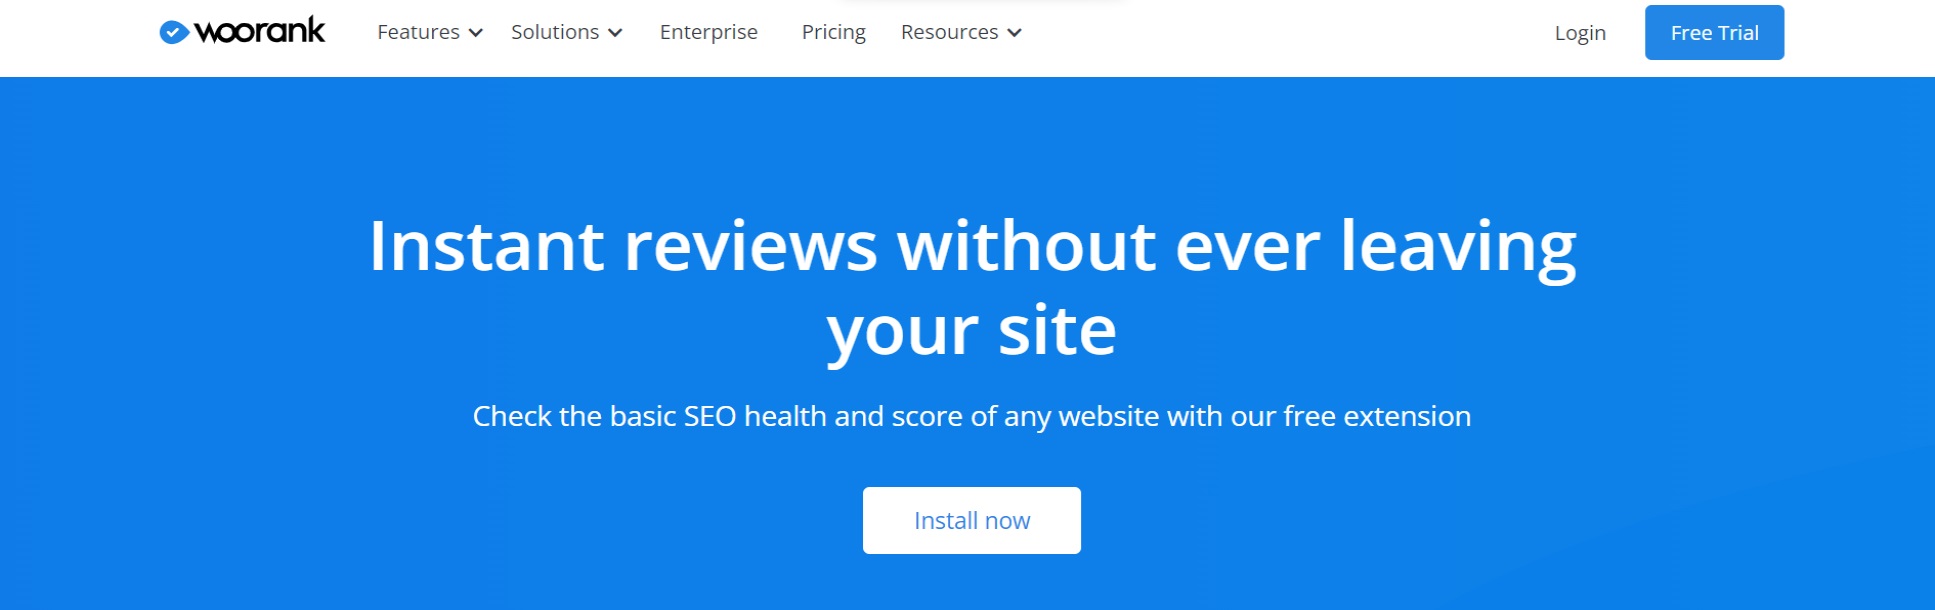 SEO-Analysis-and-Website-Review-by-WooRank-Chrome-Extension